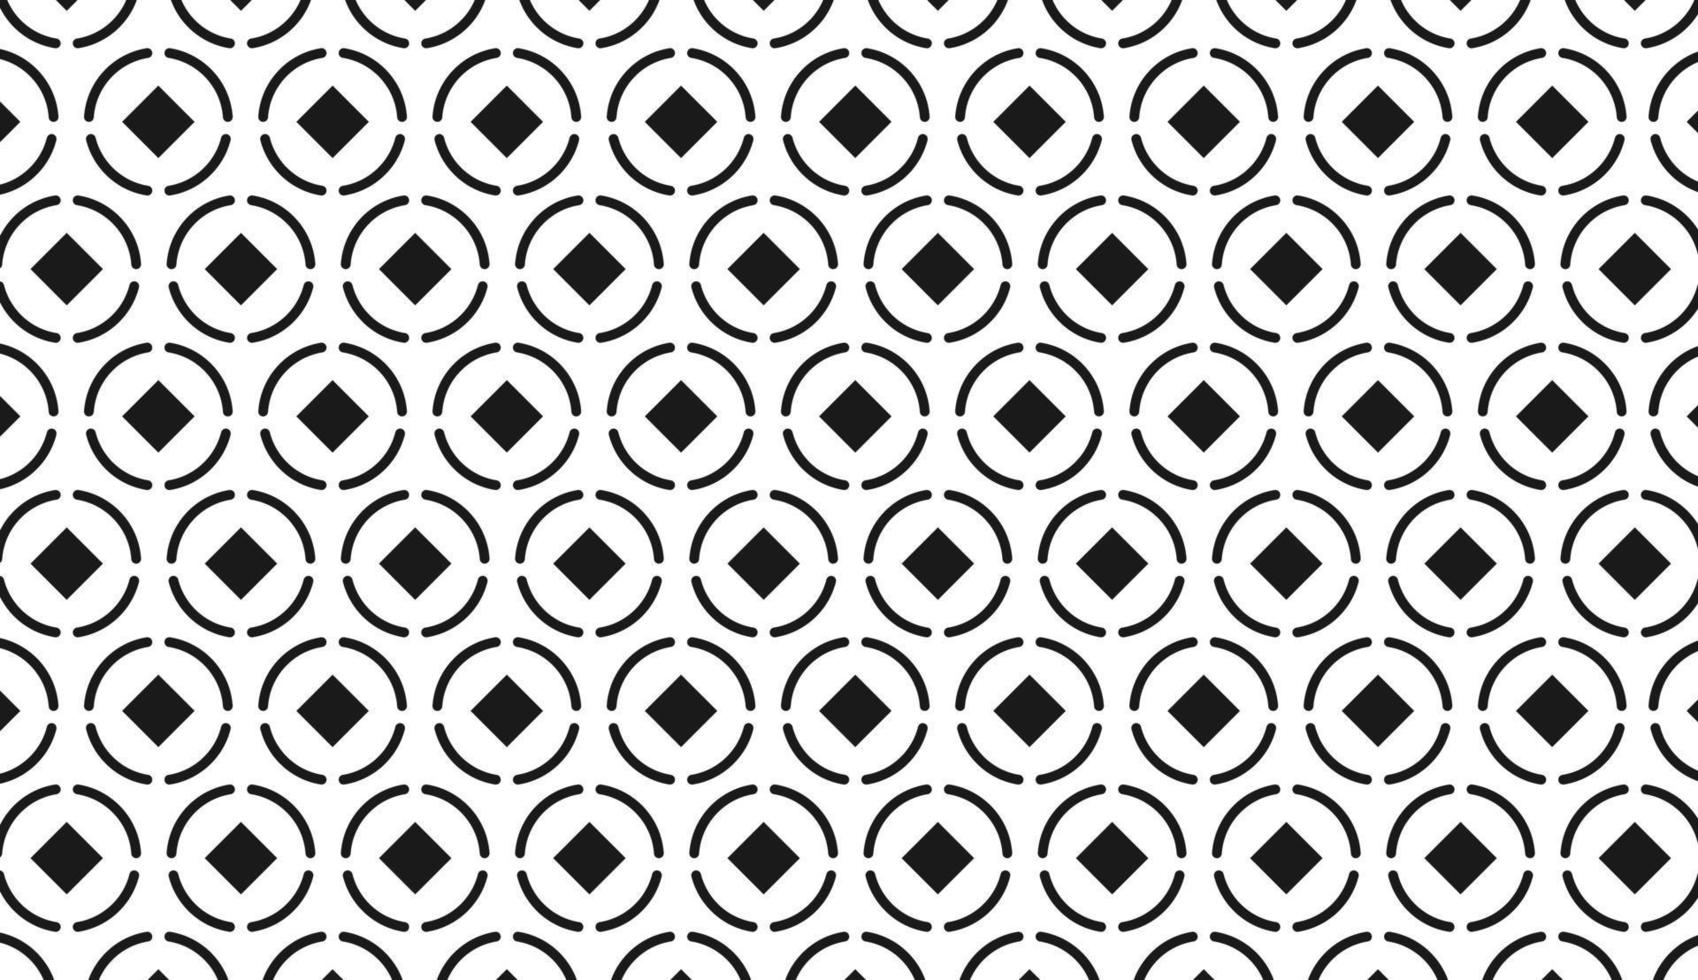 Polka dot ornament. Seamless pattern of small circles and rhombuses. Minimalist modern pattern design. Can be used for posters, brochures, postcards, and other printing needs. Vector illustration